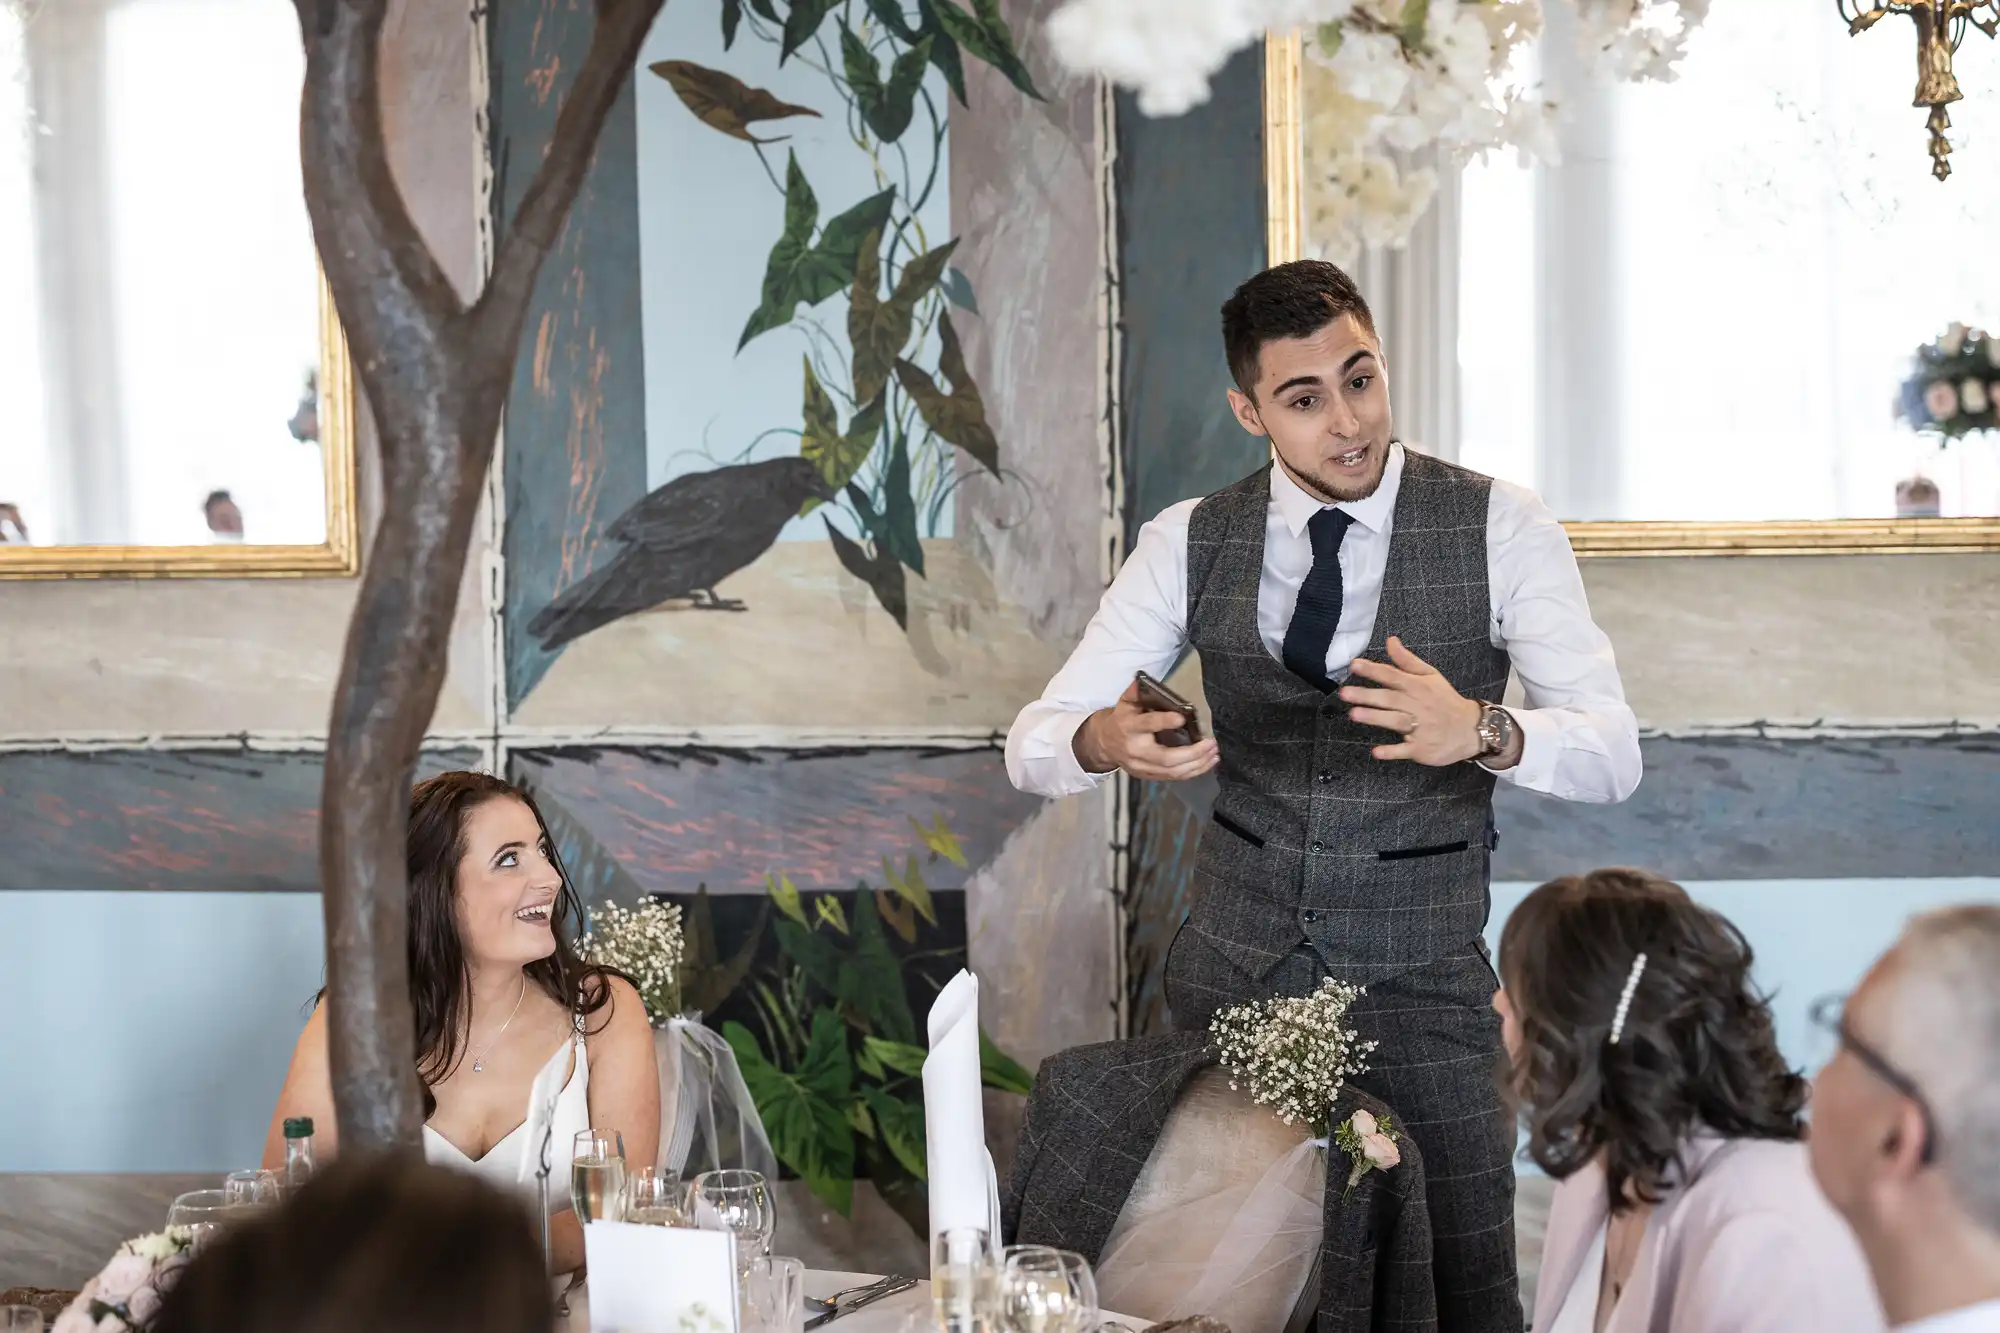 Groom speech stands speaking animatedly at a wedding, with guests looking on and smiling in a room with tree and bird murals.